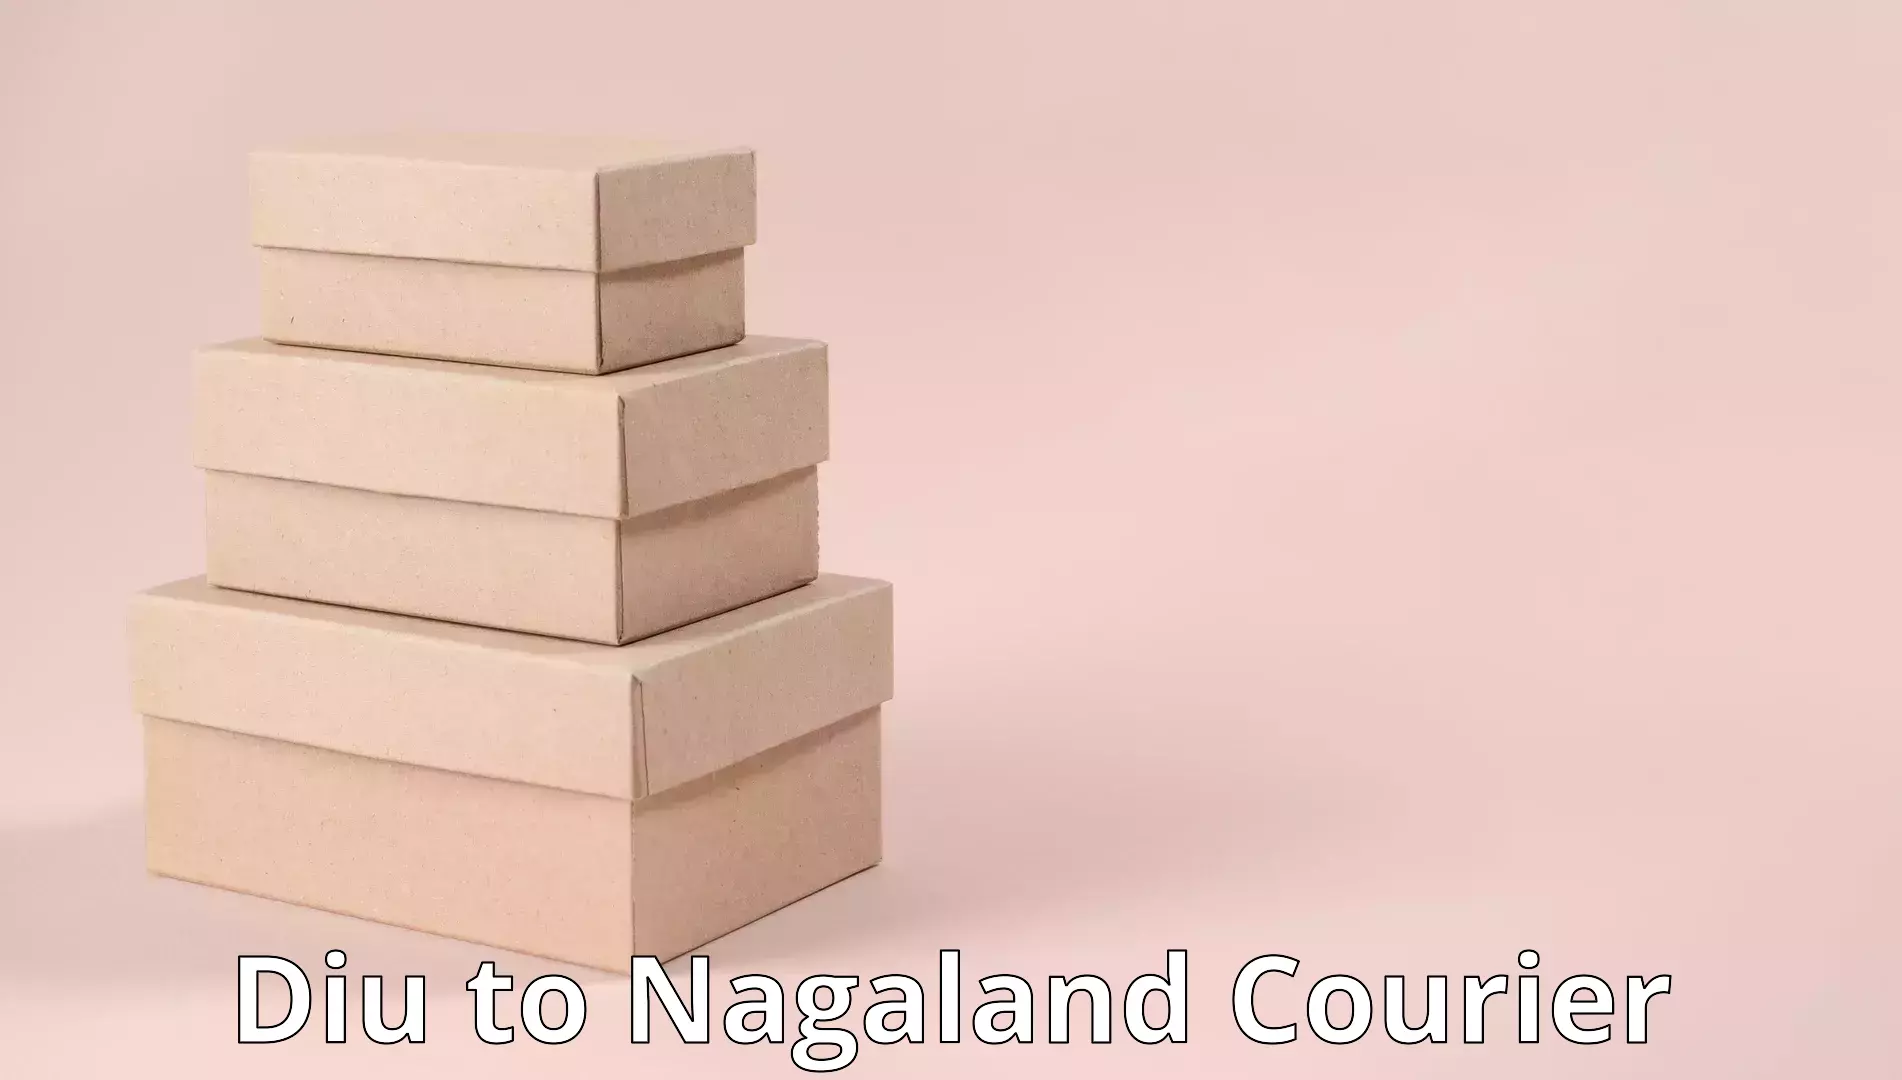 Full-service relocation Diu to Nagaland